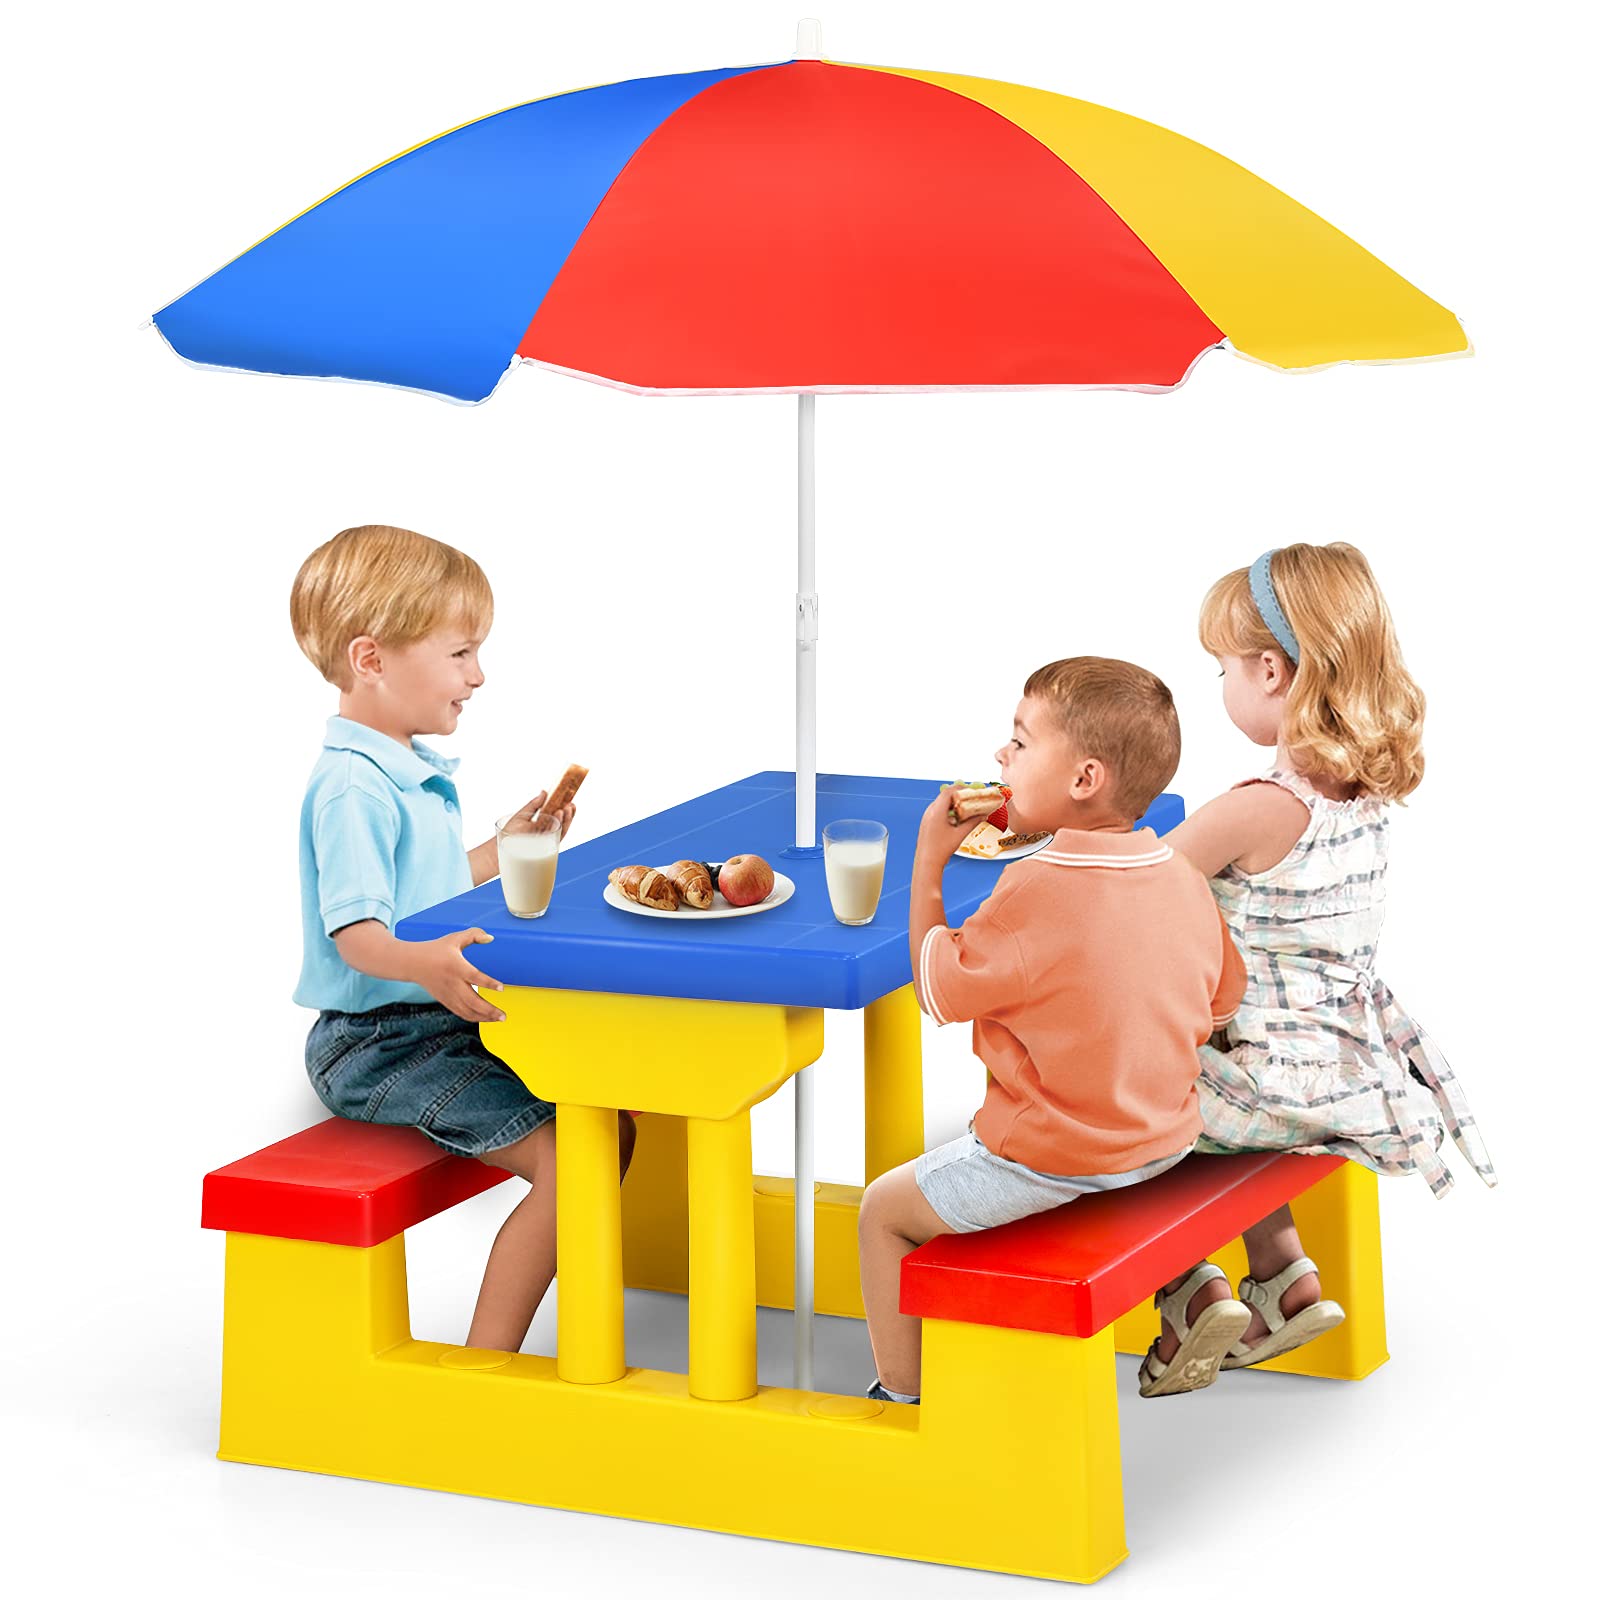 Costzon Kids Portable Picnic Table and Bench with Removable Umbrella for Toddlers, Great for Garden, Backyard, Patio, Indoor & O